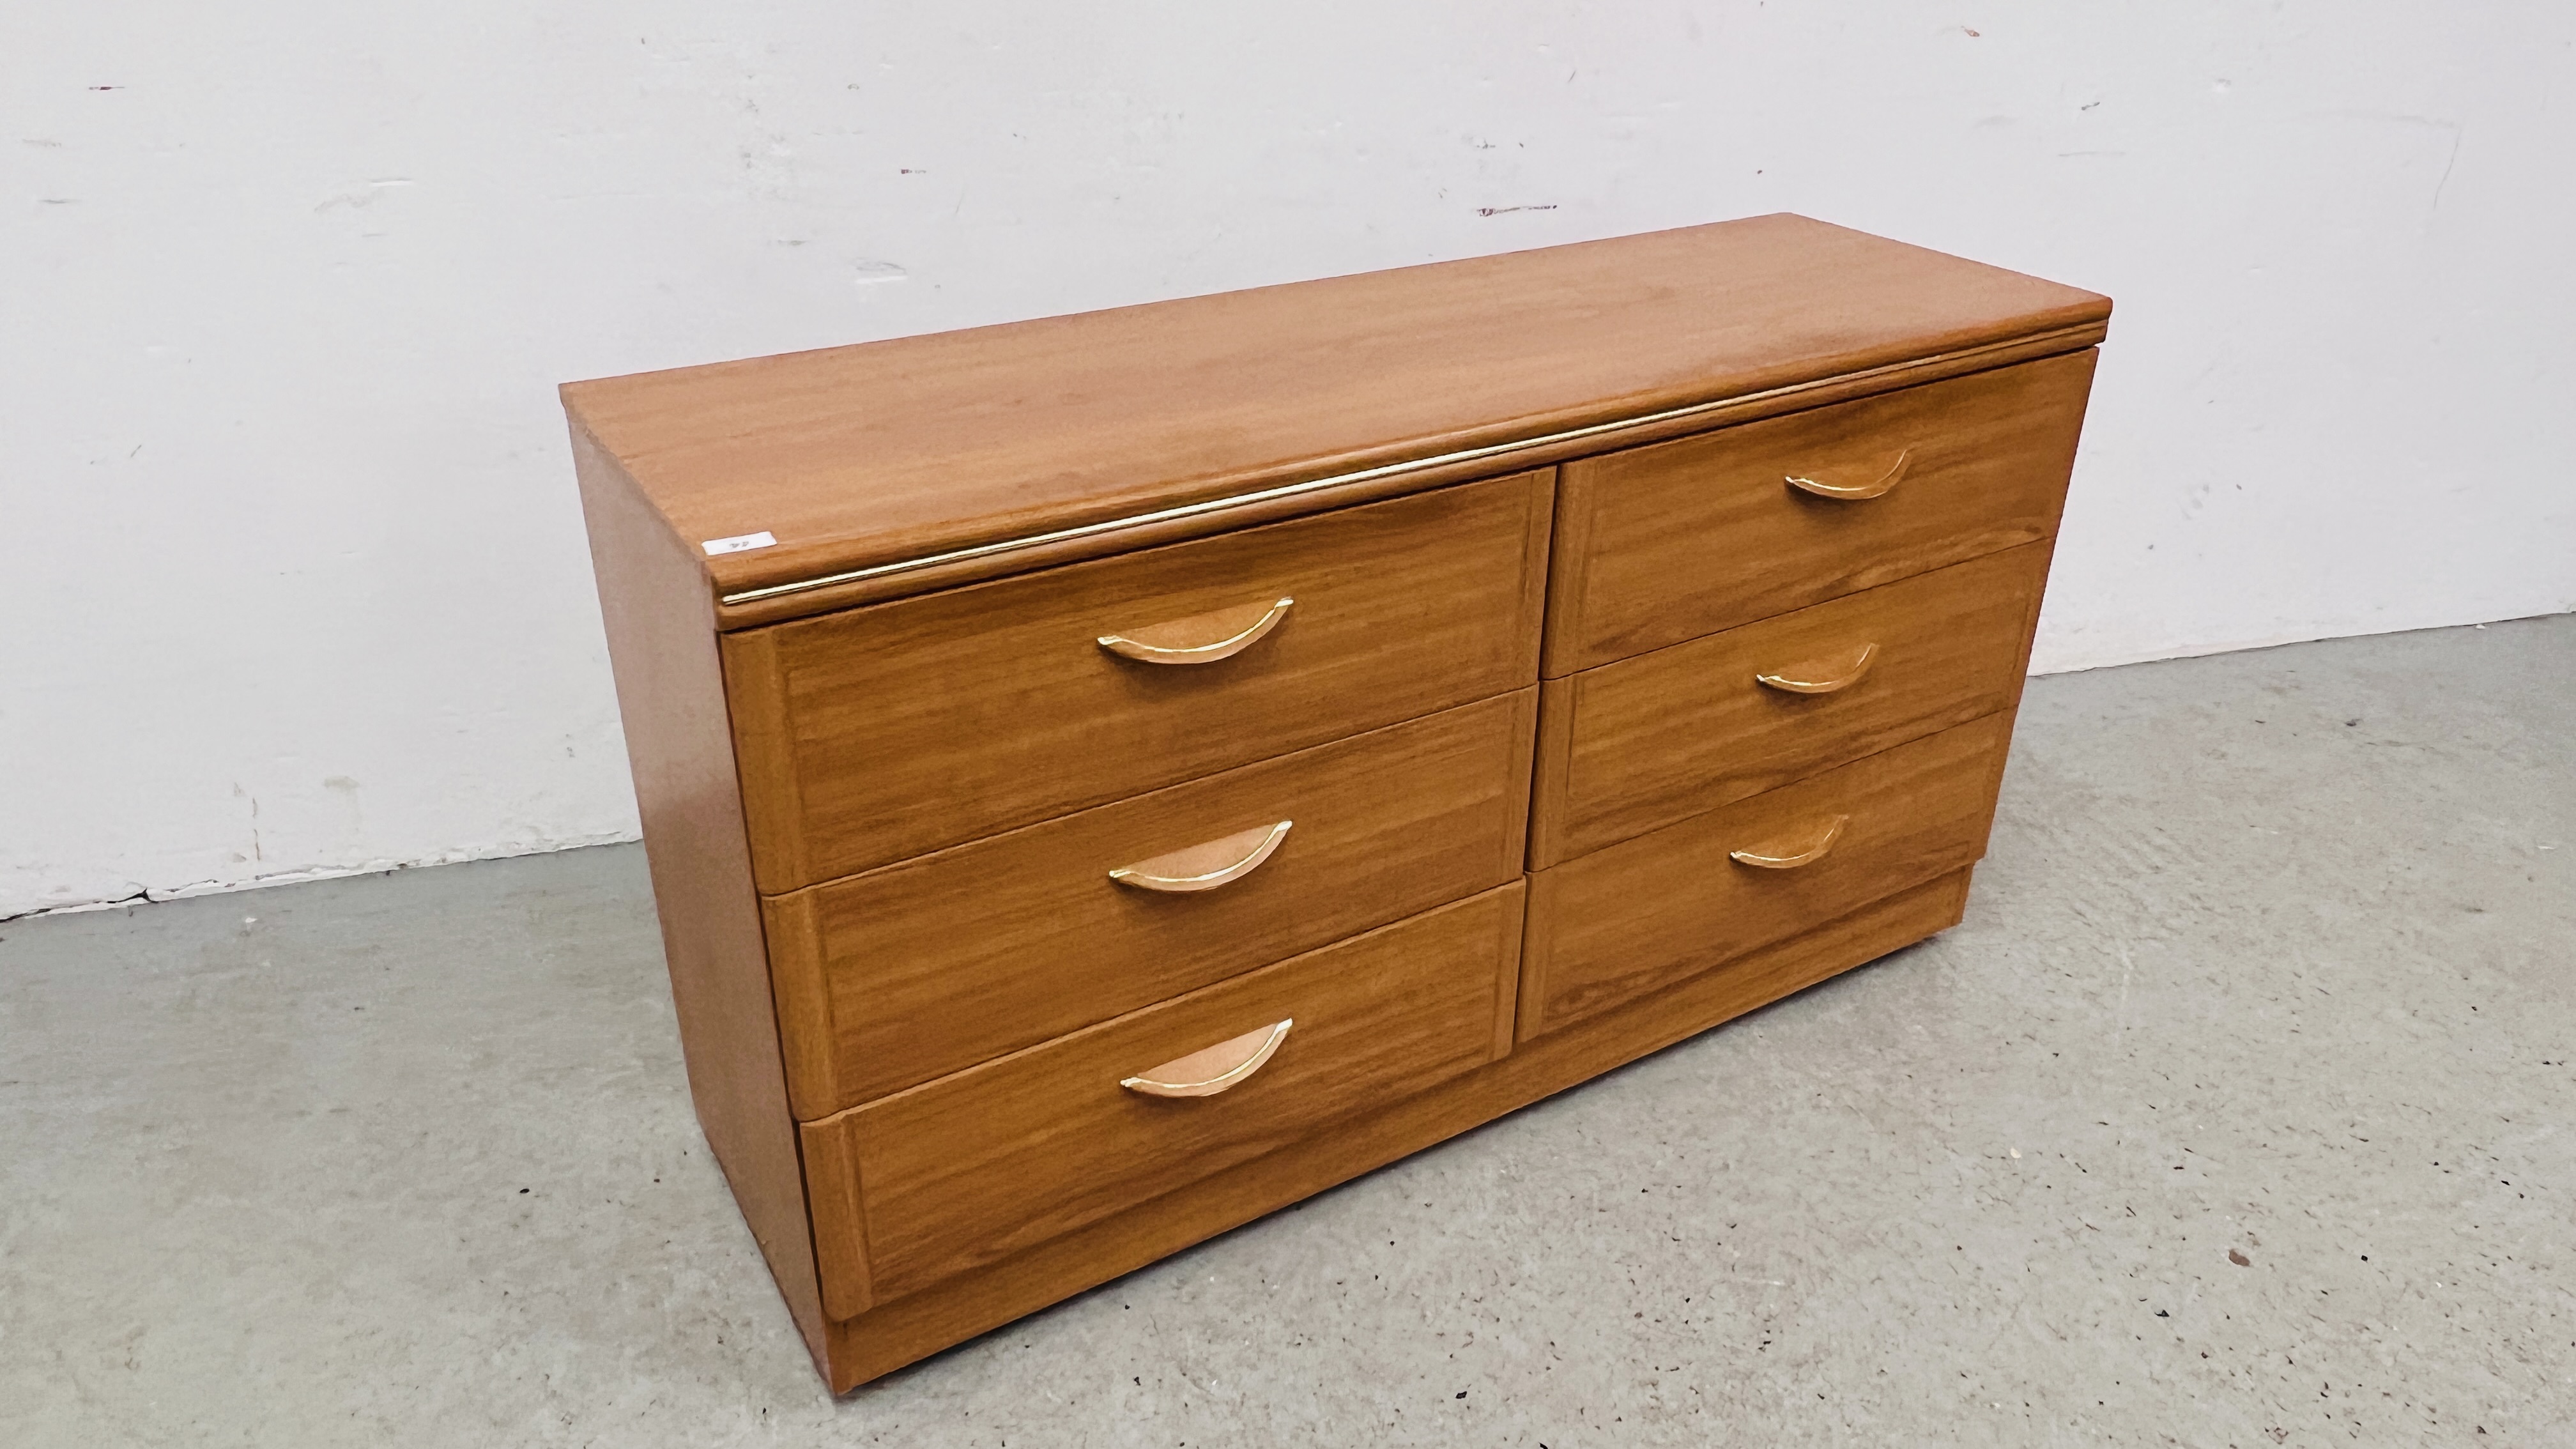 A MODERN ALSTONS CHERRY WOOD FINISH SIX DRAWER BEDROOM CHEST, W 124CM, D 41CM, H 70CM. - Image 2 of 4